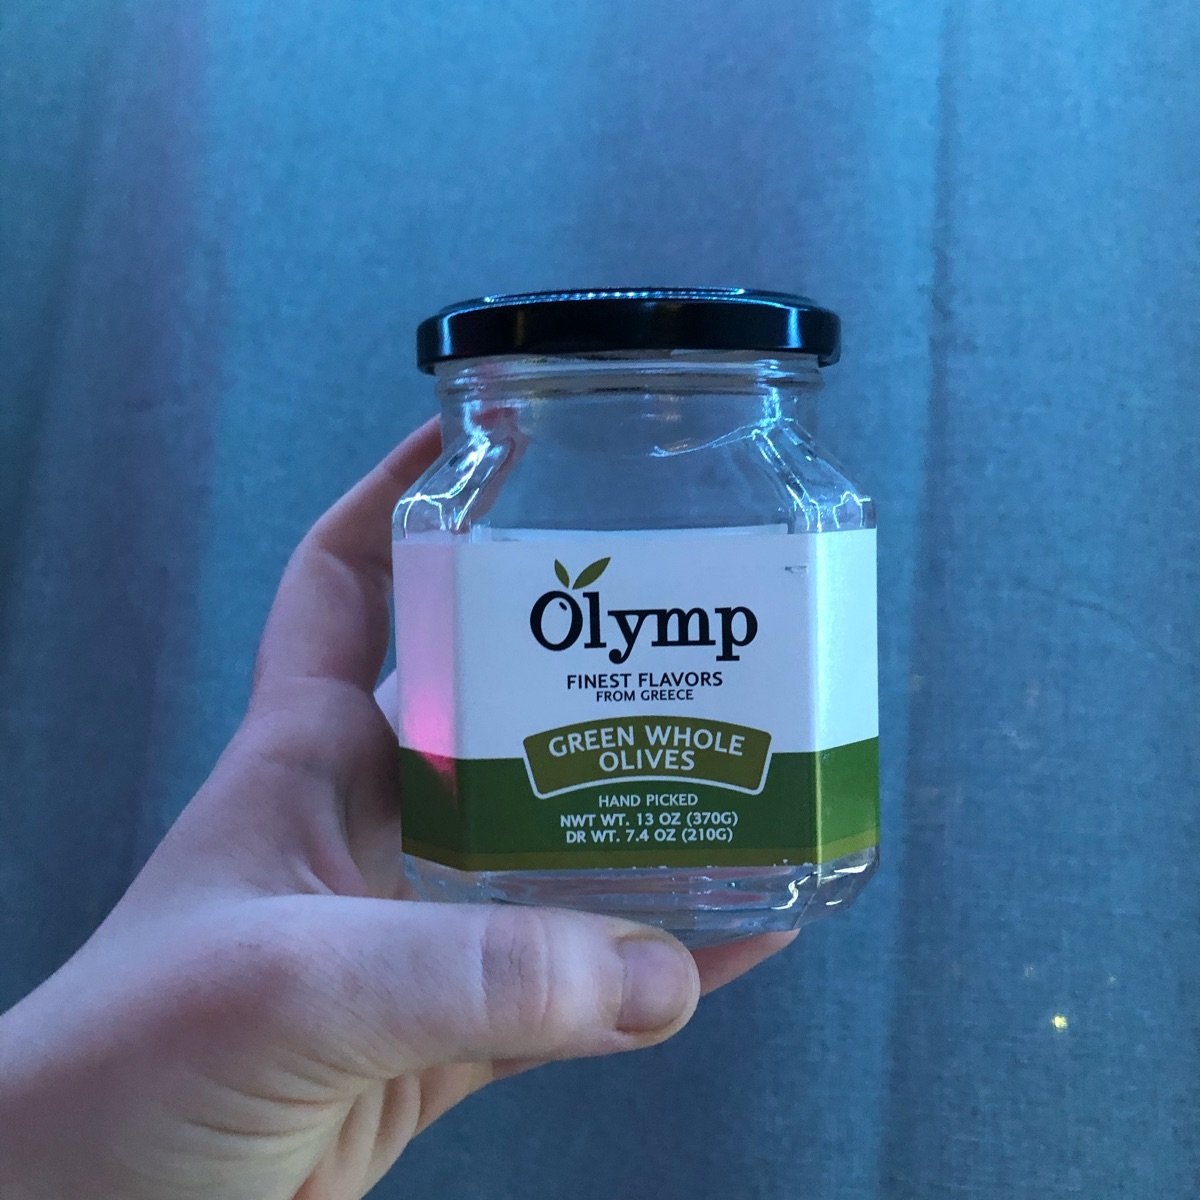 Olymp Green Whole Olives Reviews | abillion